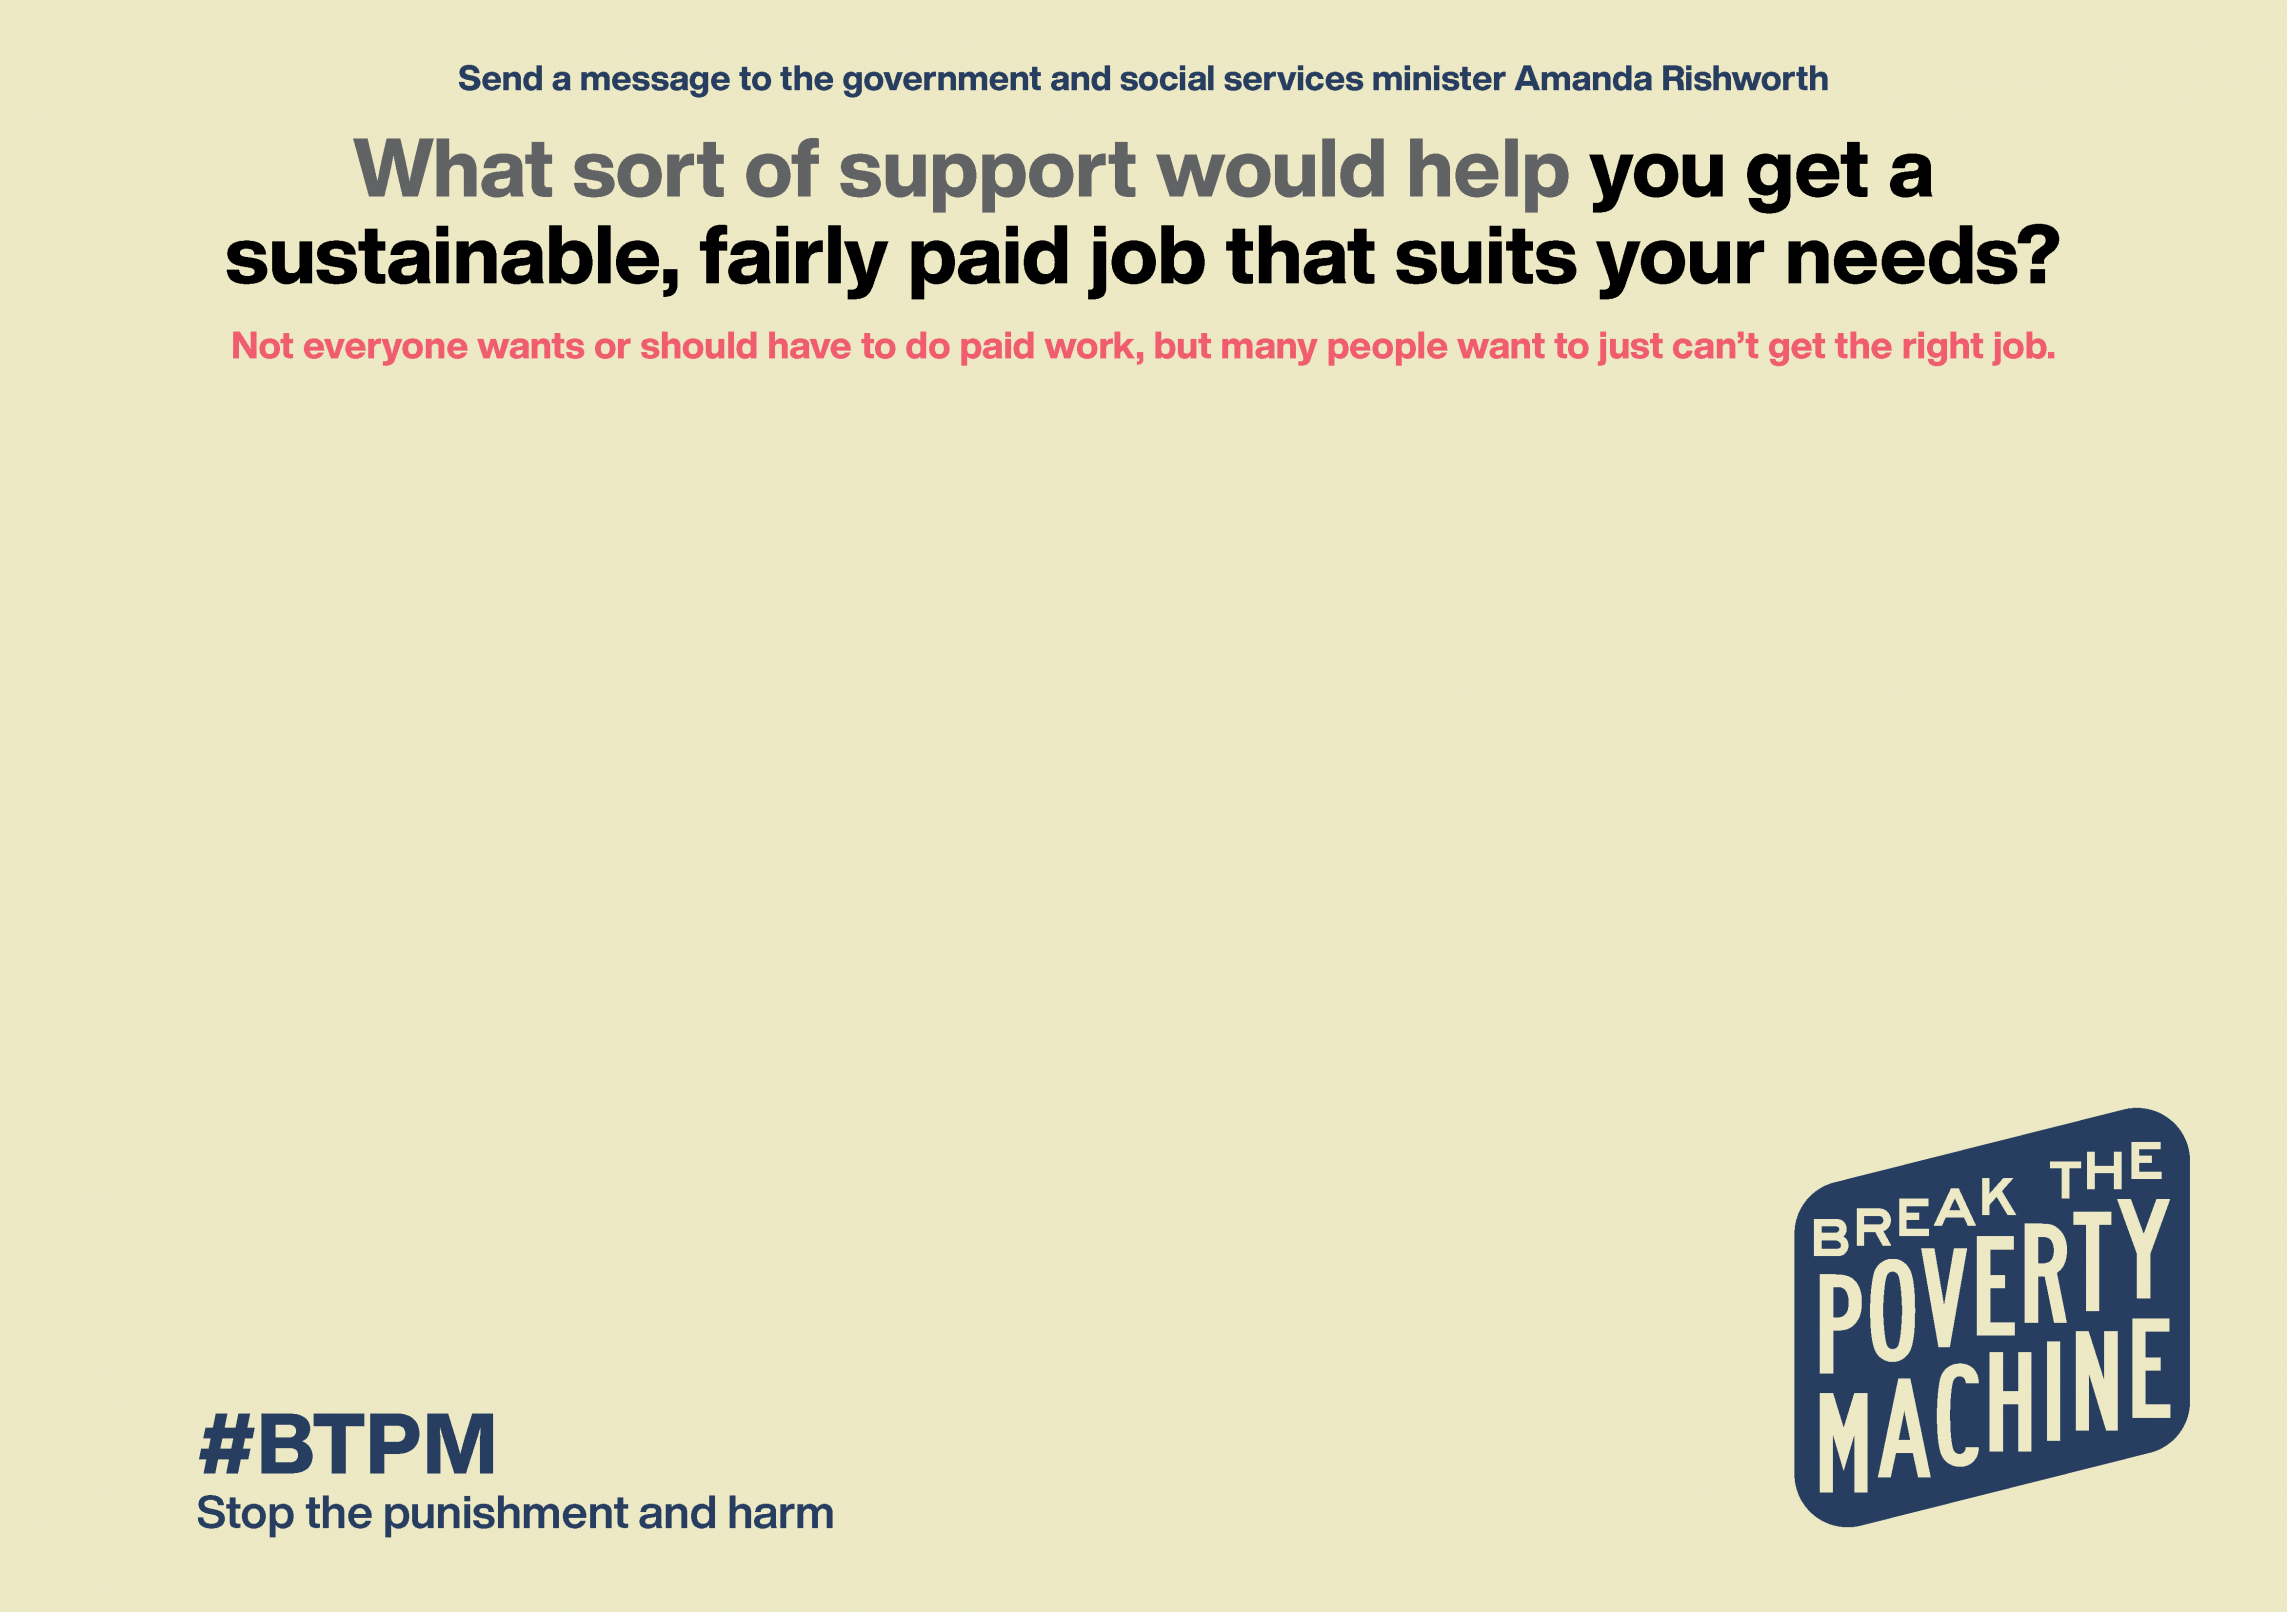 #BTPM: What support would help you get a sustainable job? Blank Meme Template